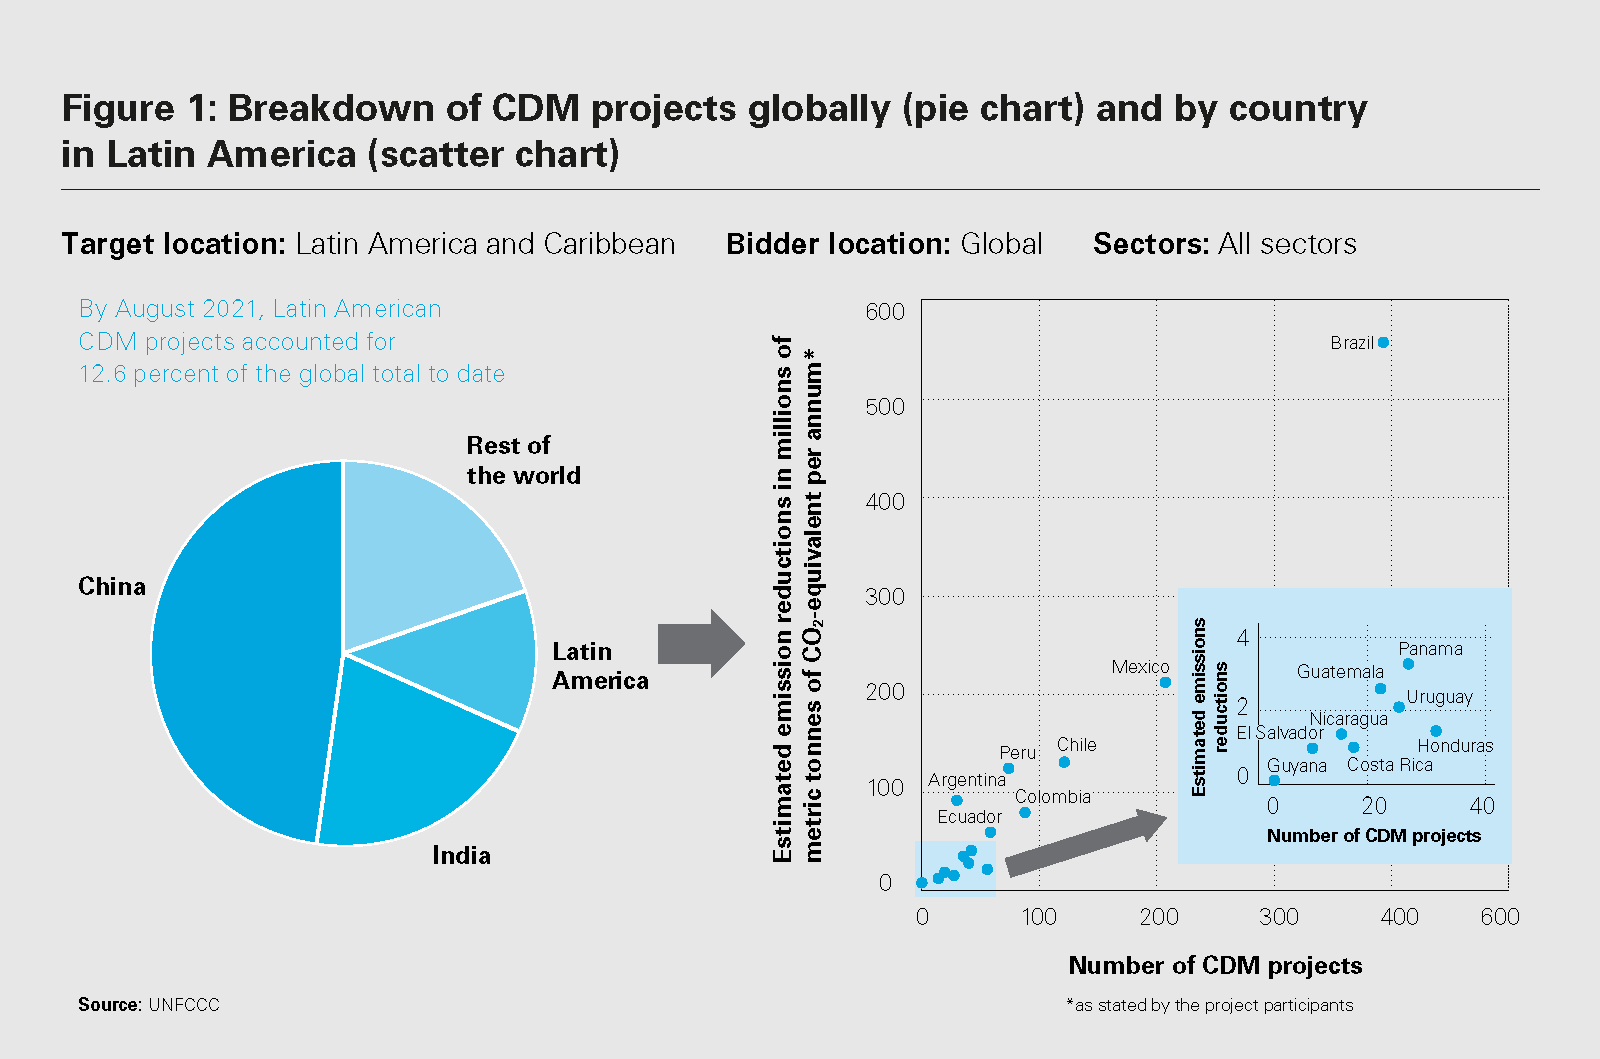  Breakdown of CDM projects globally (pie chart) and by country in Latin America (scatter chart)